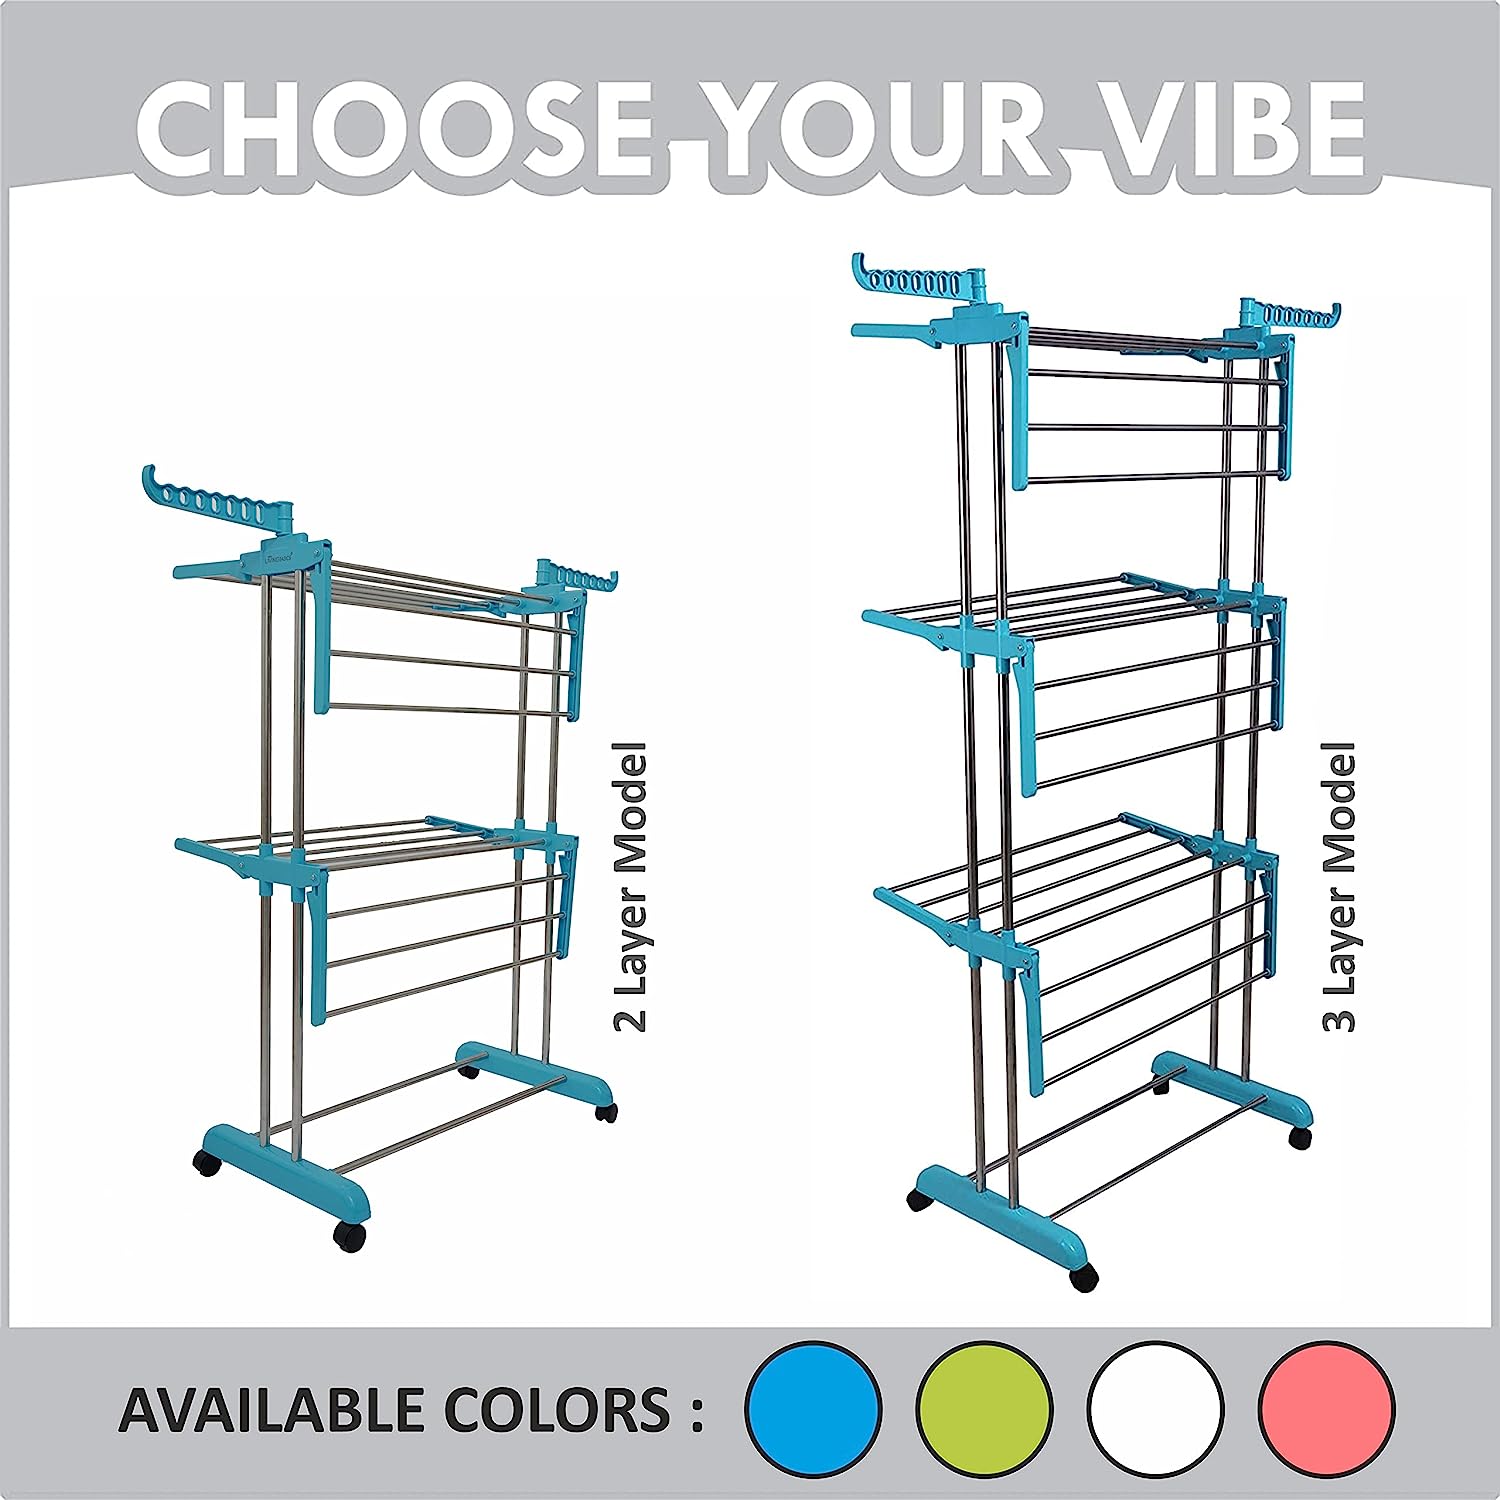 LIVINGBASICS Cloth Drying Stand Rust-Free Stainless Steel & ABS 2 Layer Foldable Clothes Dryer Rack / Folding Laundry Dry Stands with Wheels for Home / Indoor / Outdoor / Balcony (Cyan Blue)